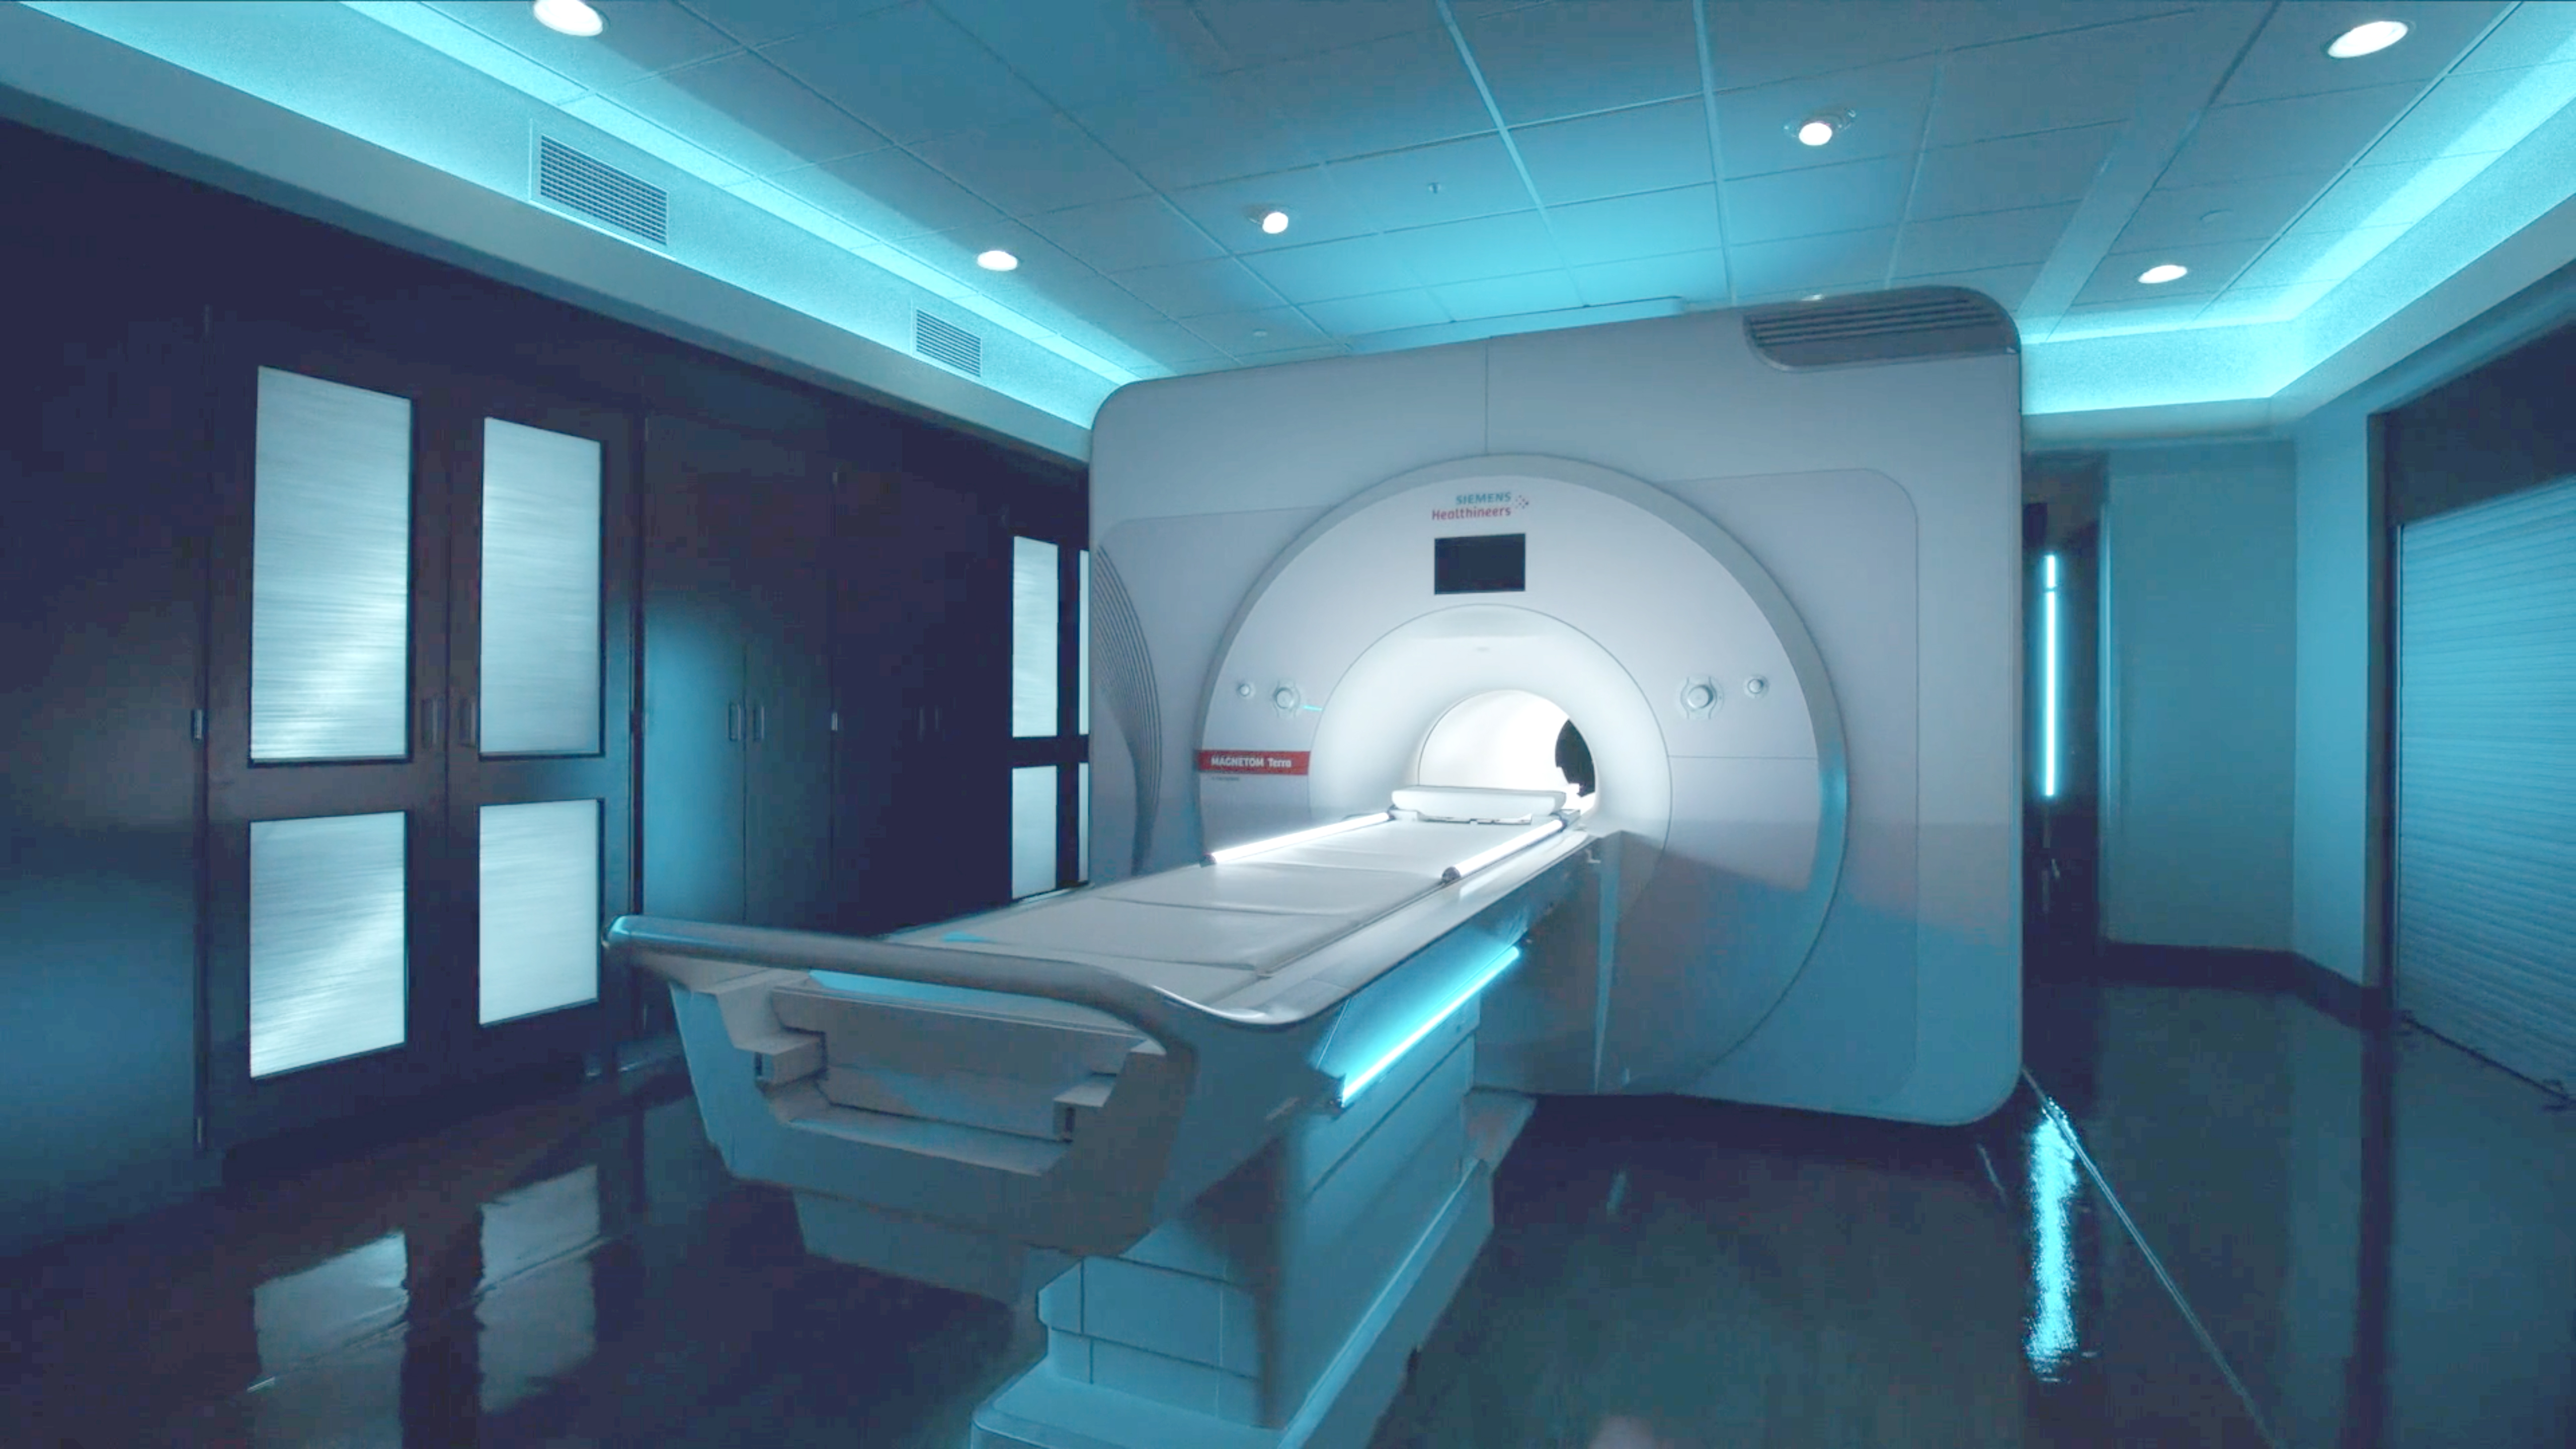 The Siemens Healthineers MAGNETOM Terra 7 Tesla MRI scanner located at the Carle Illinois Advanced Imaging Center.